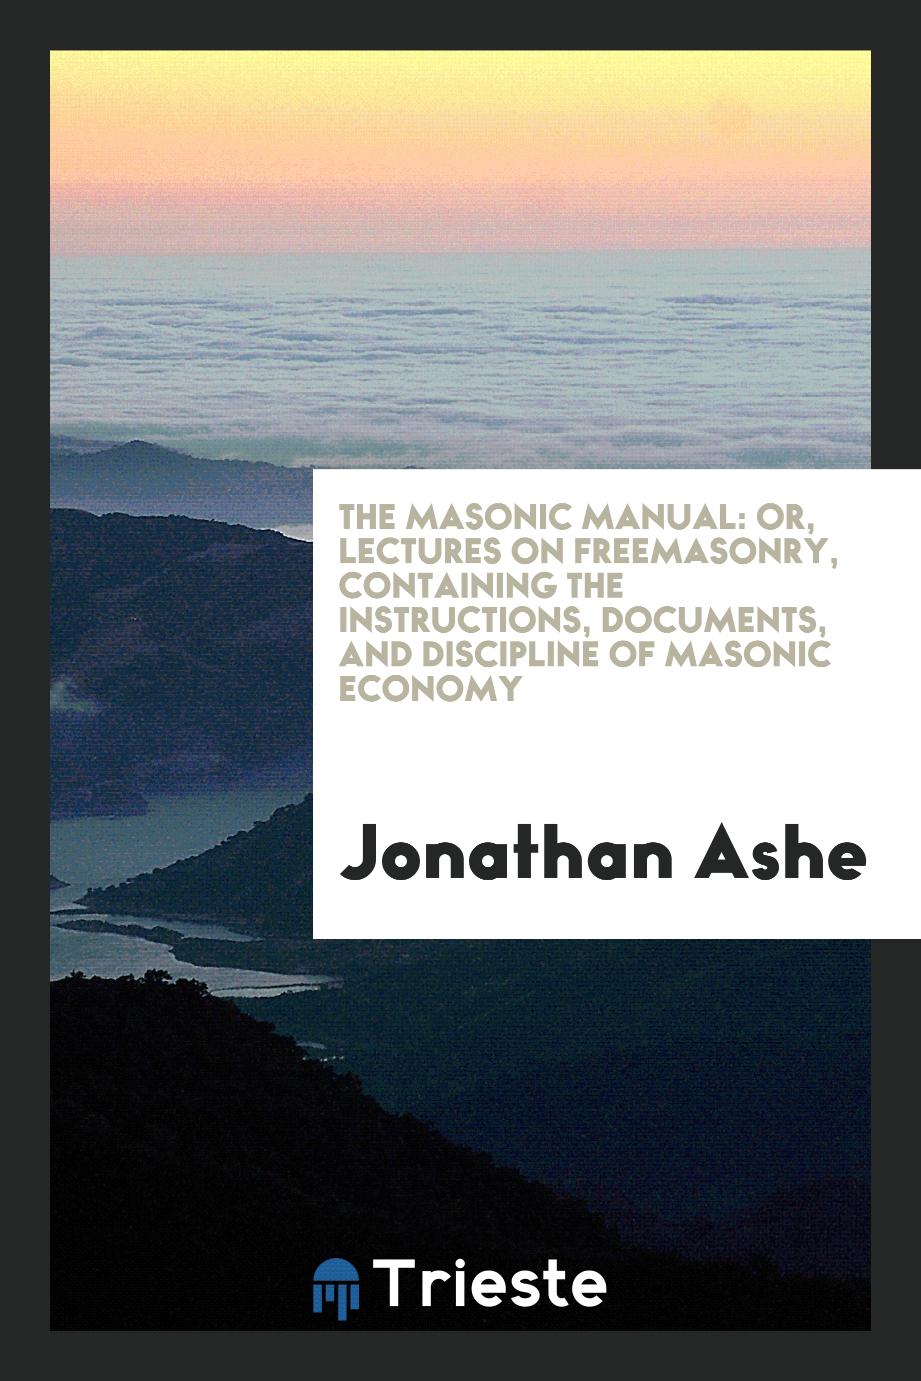 The Masonic Manual: Or, Lectures on Freemasonry, Containing the Instructions, Documents, and Discipline of Masonic Economy